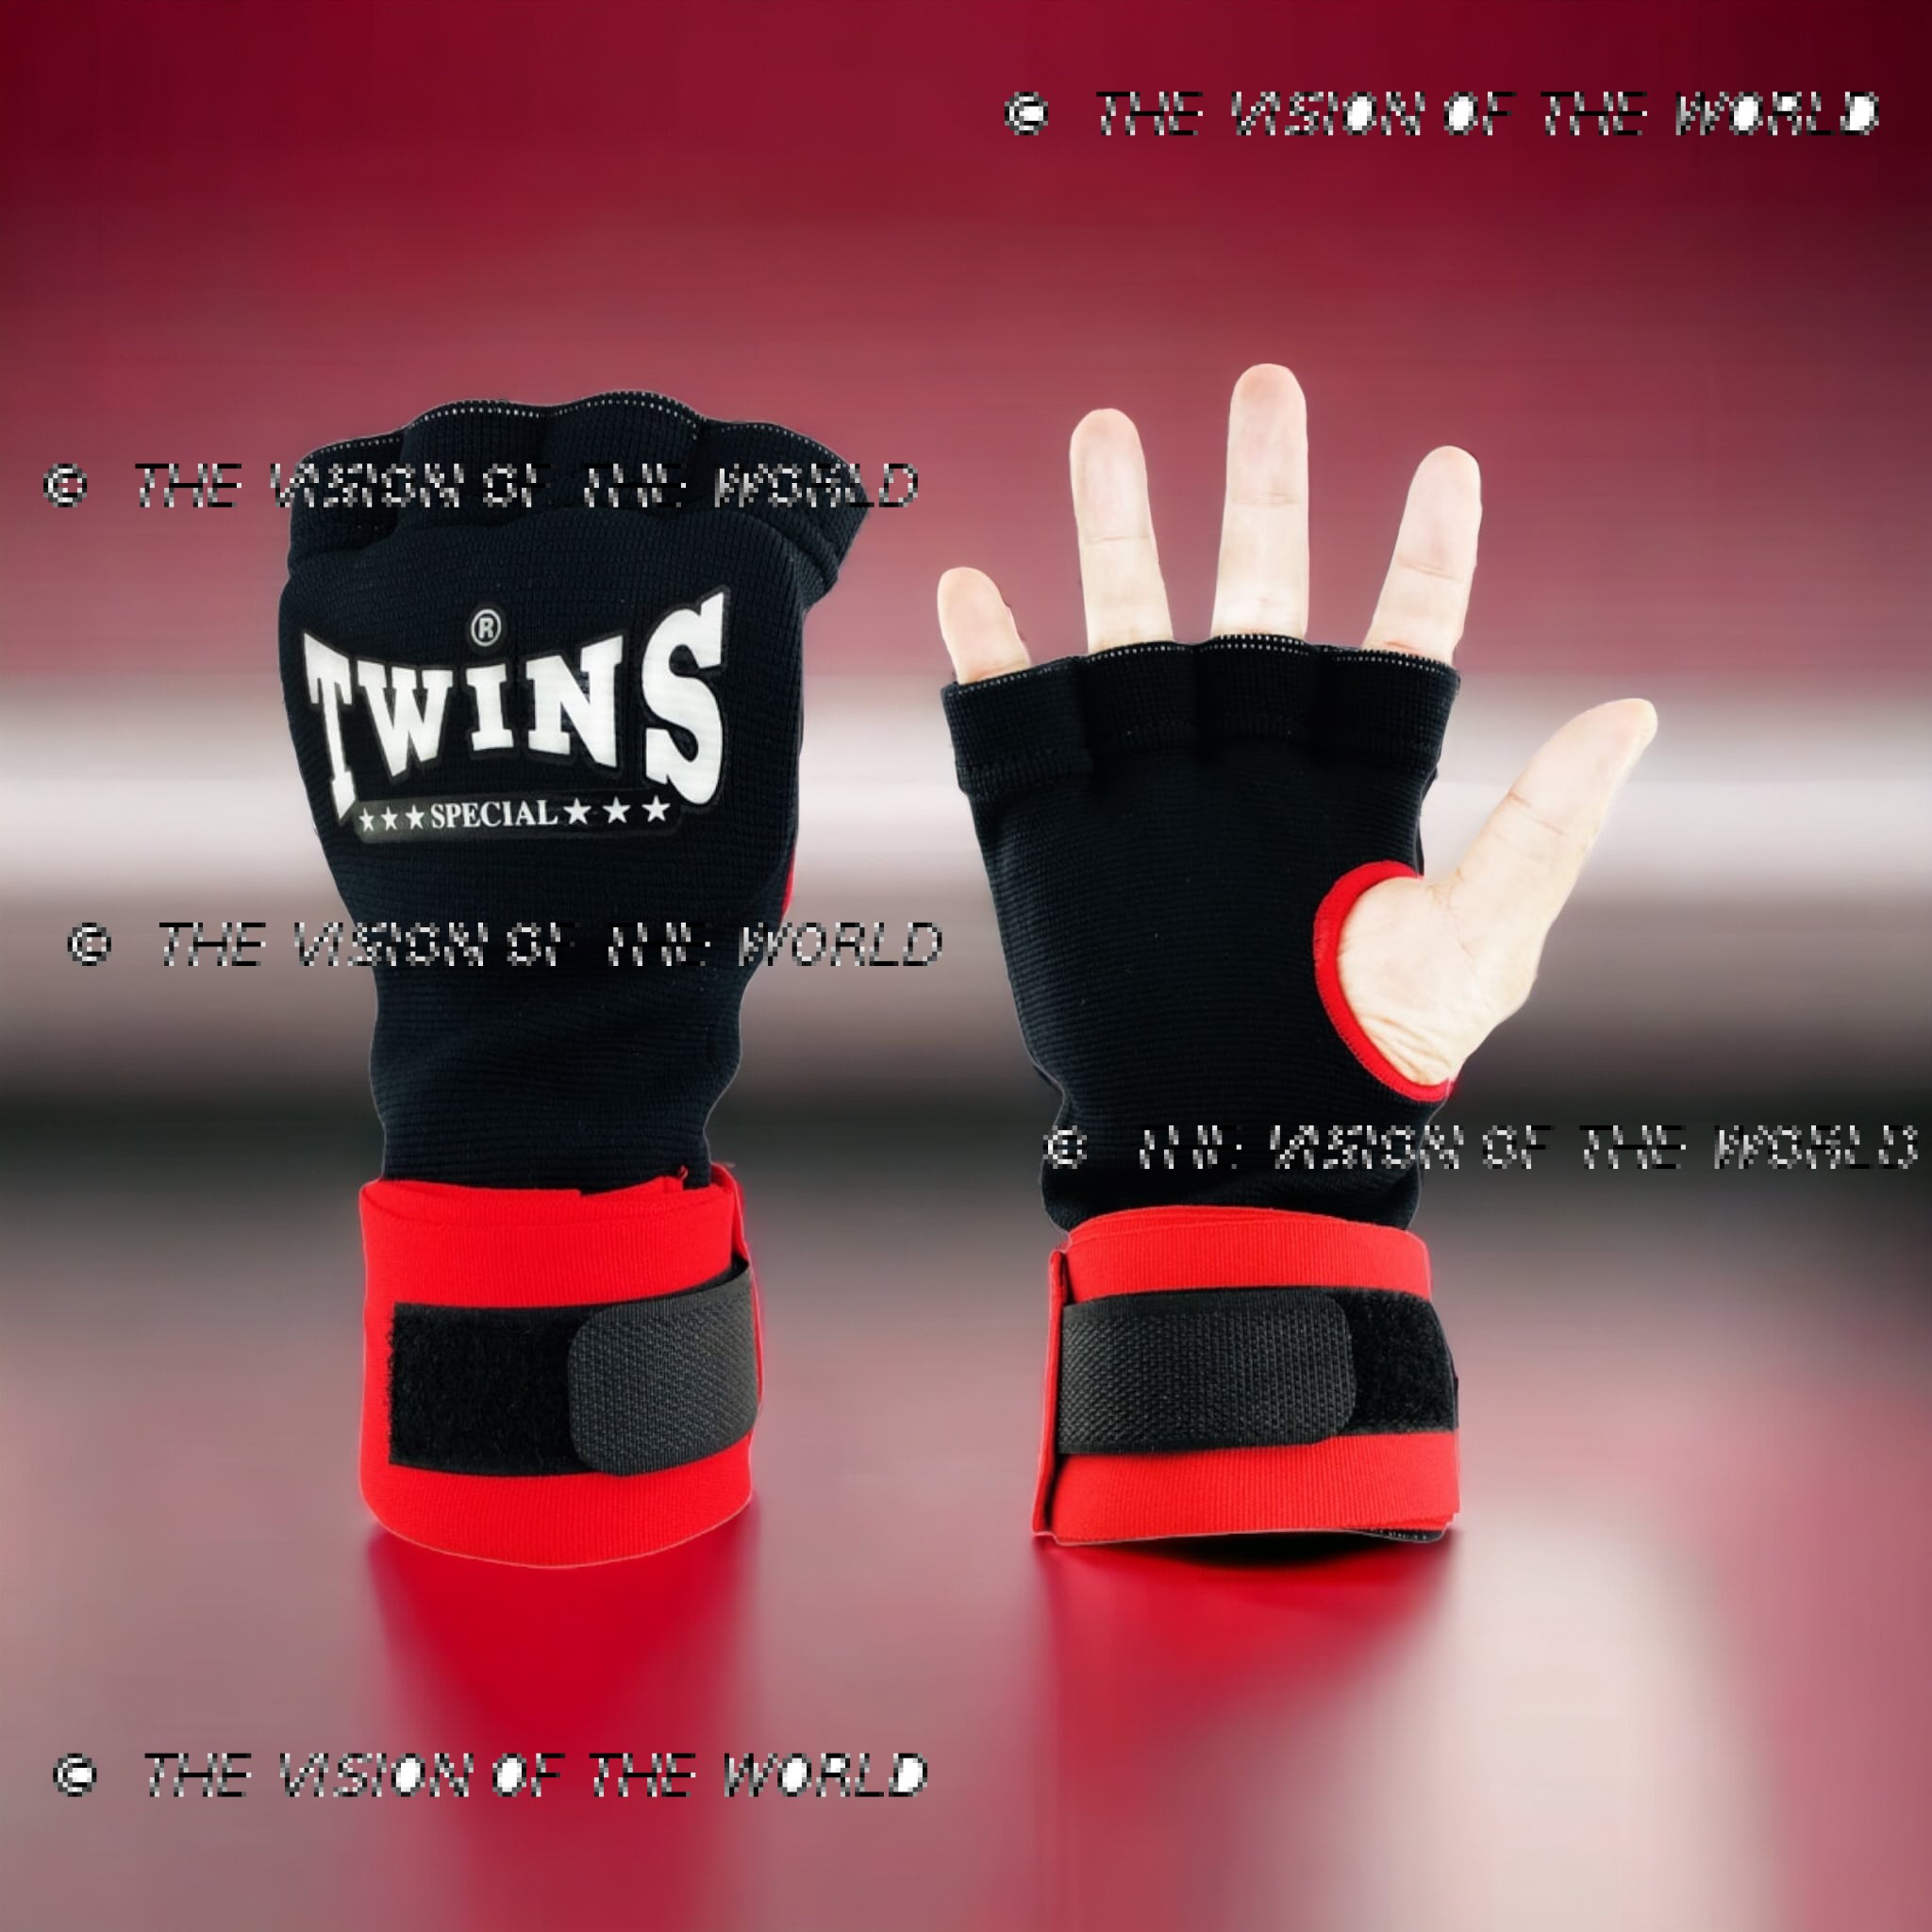 Mitaines de protection Twins CH7 muaythai kickboxing mma boxe